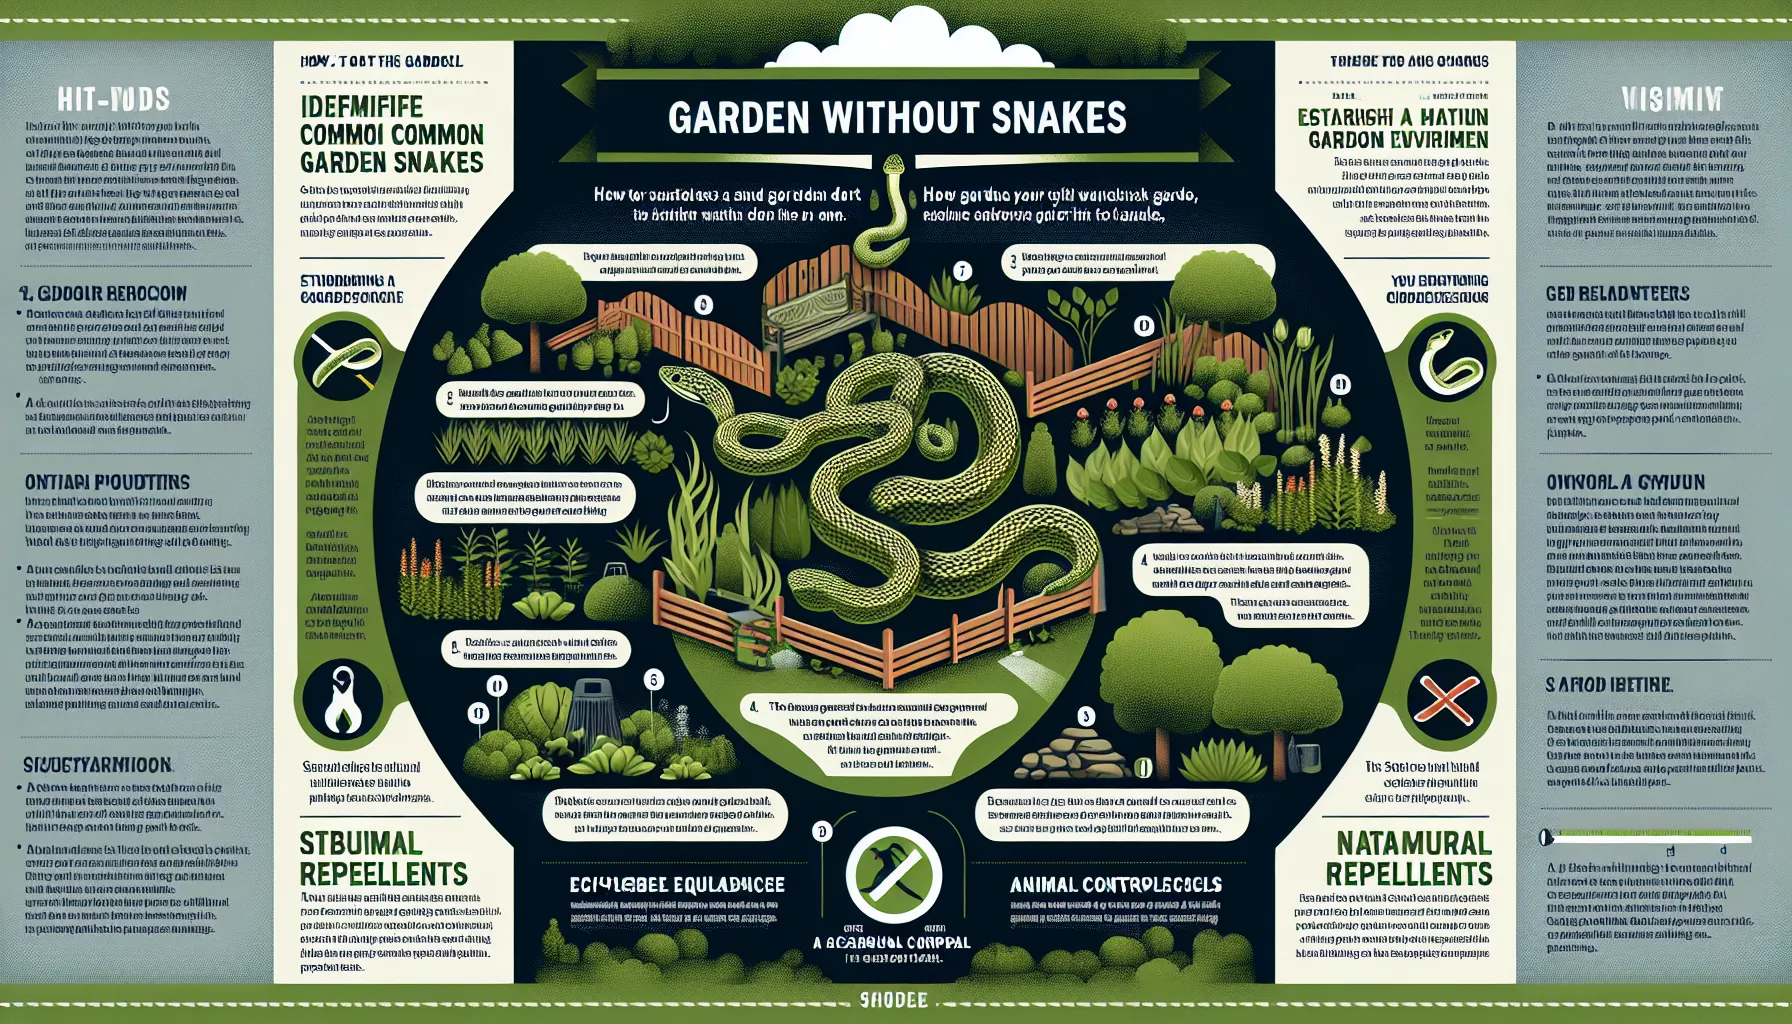 An informative illustration detailing steps on how to avoid garden snakes in a stylized, snake-free garden layout.